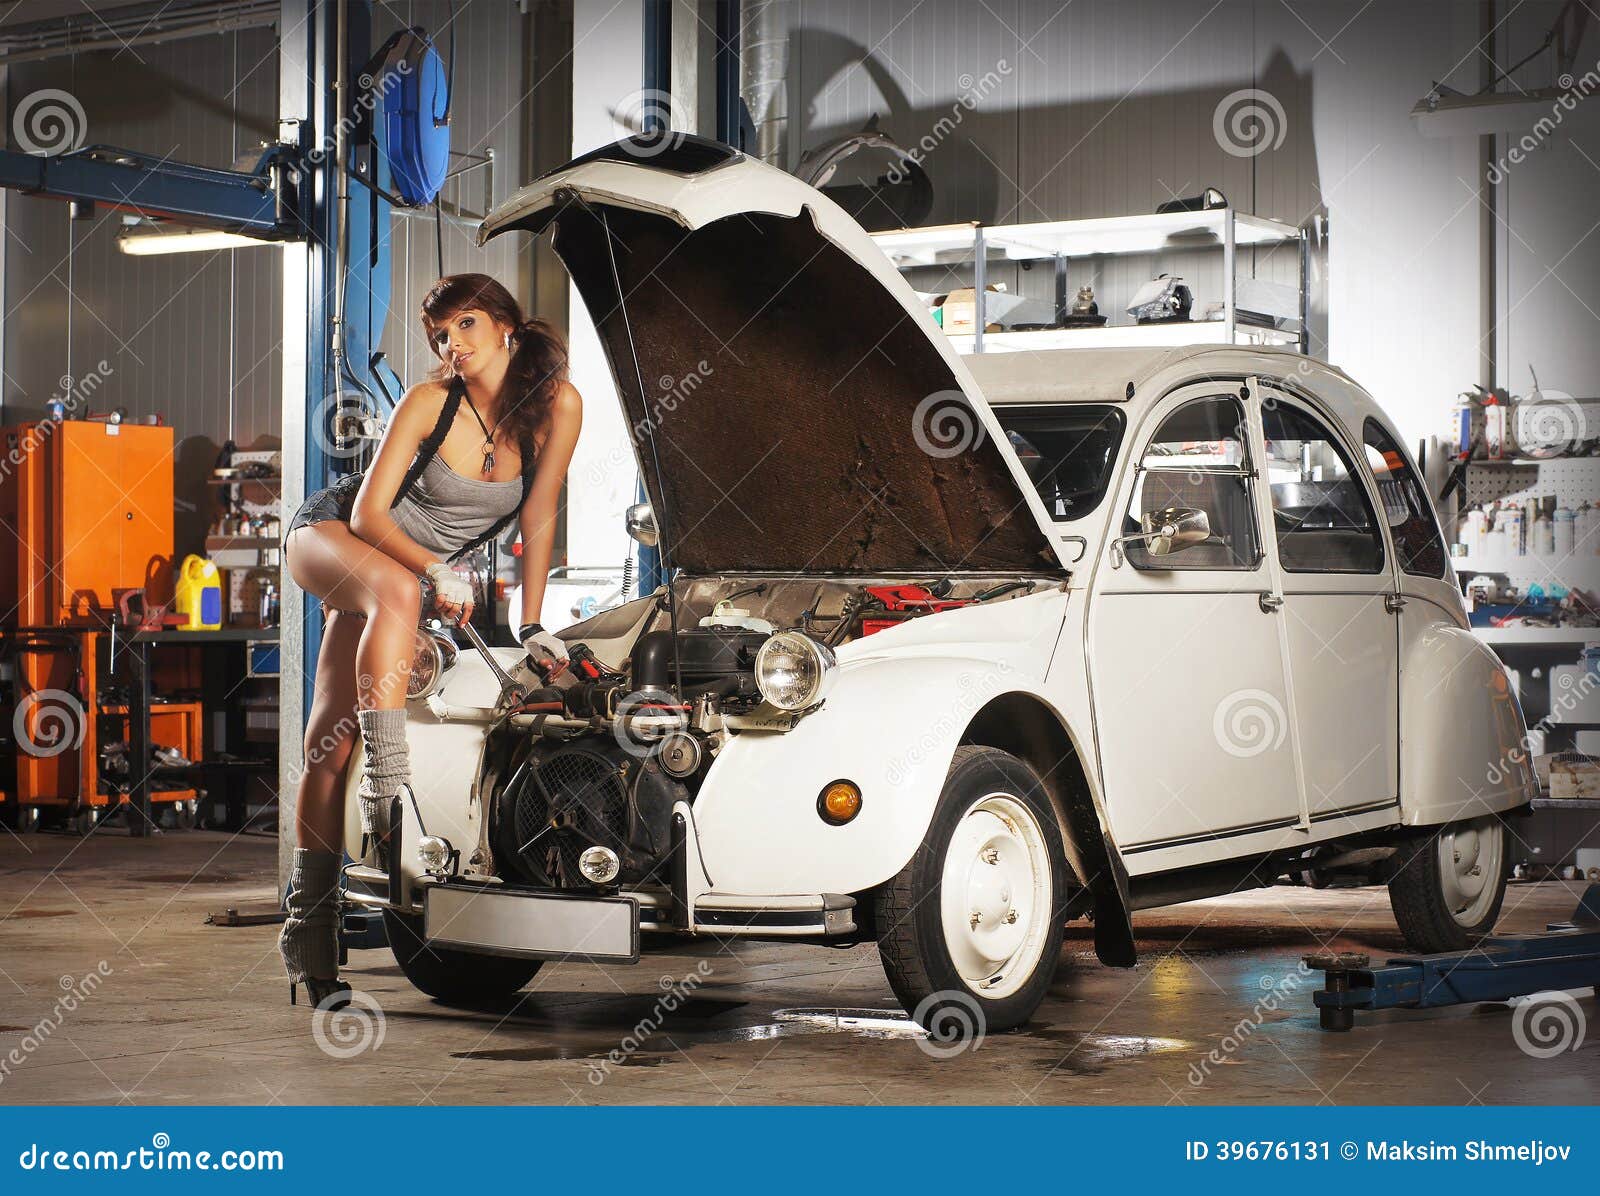 A Woman Repairing A Retro Car In A Garage Stock Image Image 39676